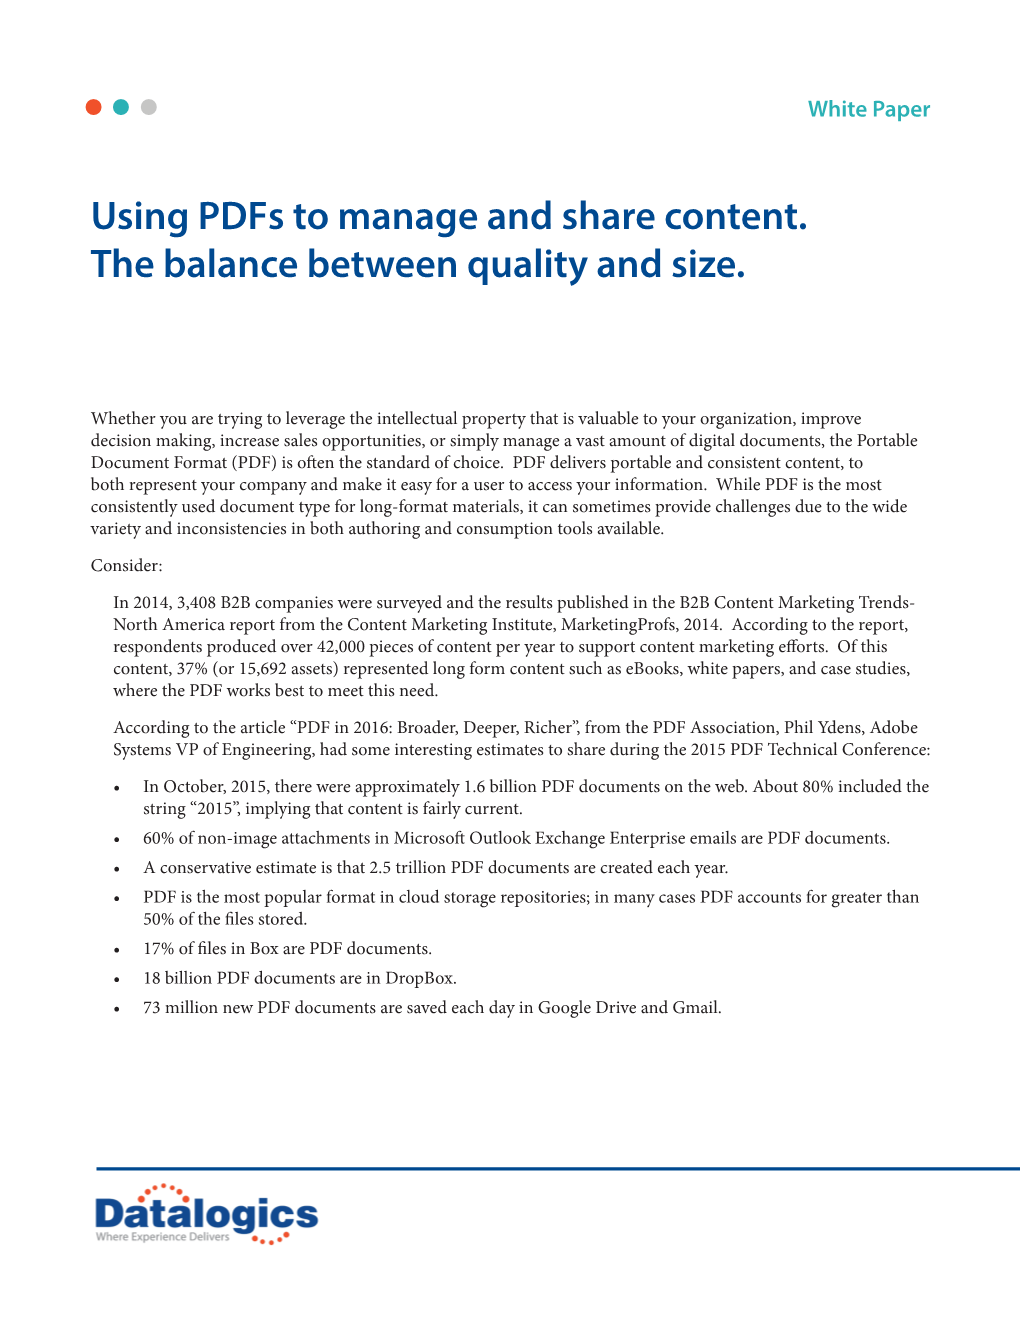 Using Pdfs to Manage and Share Content. the Balance Between Quality and Size